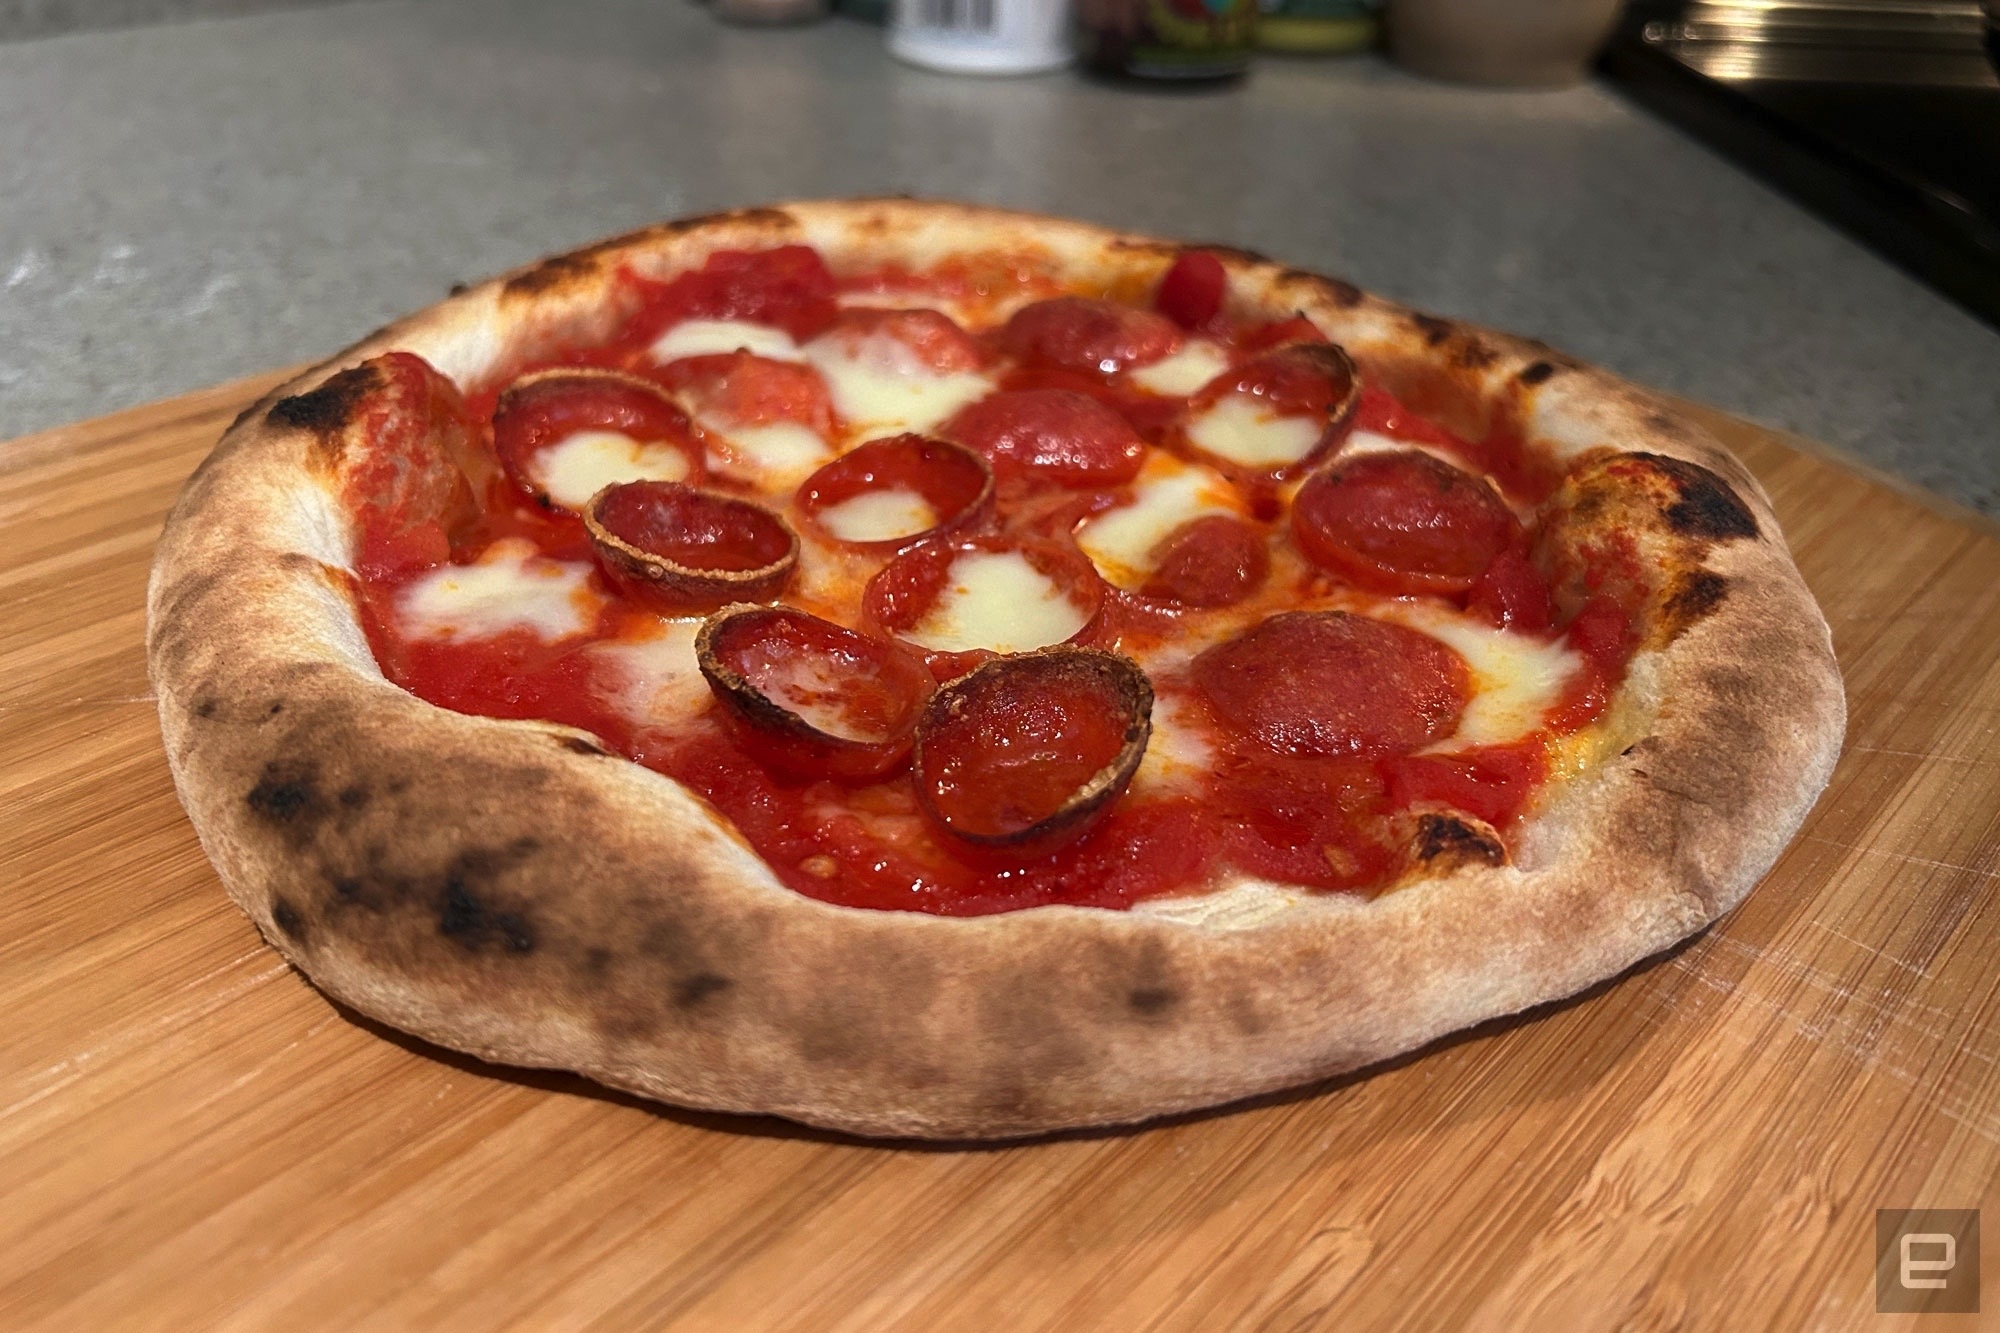 Breville Pizzaiolo review: A pricey pizza oven with lots of options | DeviceDaily.com